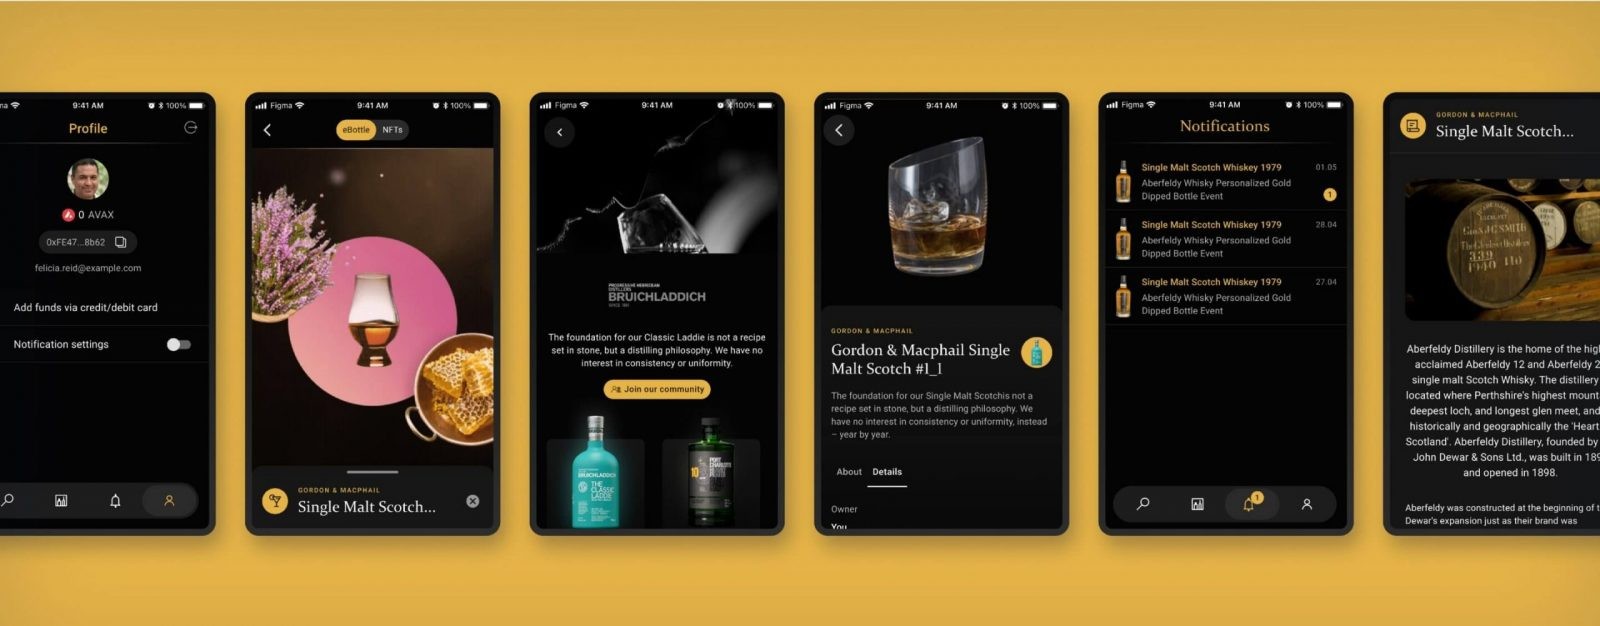 Bottlebits — NFT Marketplace for collecting and experiencing Luxury Wines and Spirits ottlebits — NFT Marketplace for collecting and experiencing Luxury Wines and Spirits ottlebits — NFT Marketplace for collecting and experiencing Luxury Wines and Spirits ottlebits Design &#8211; Artkai